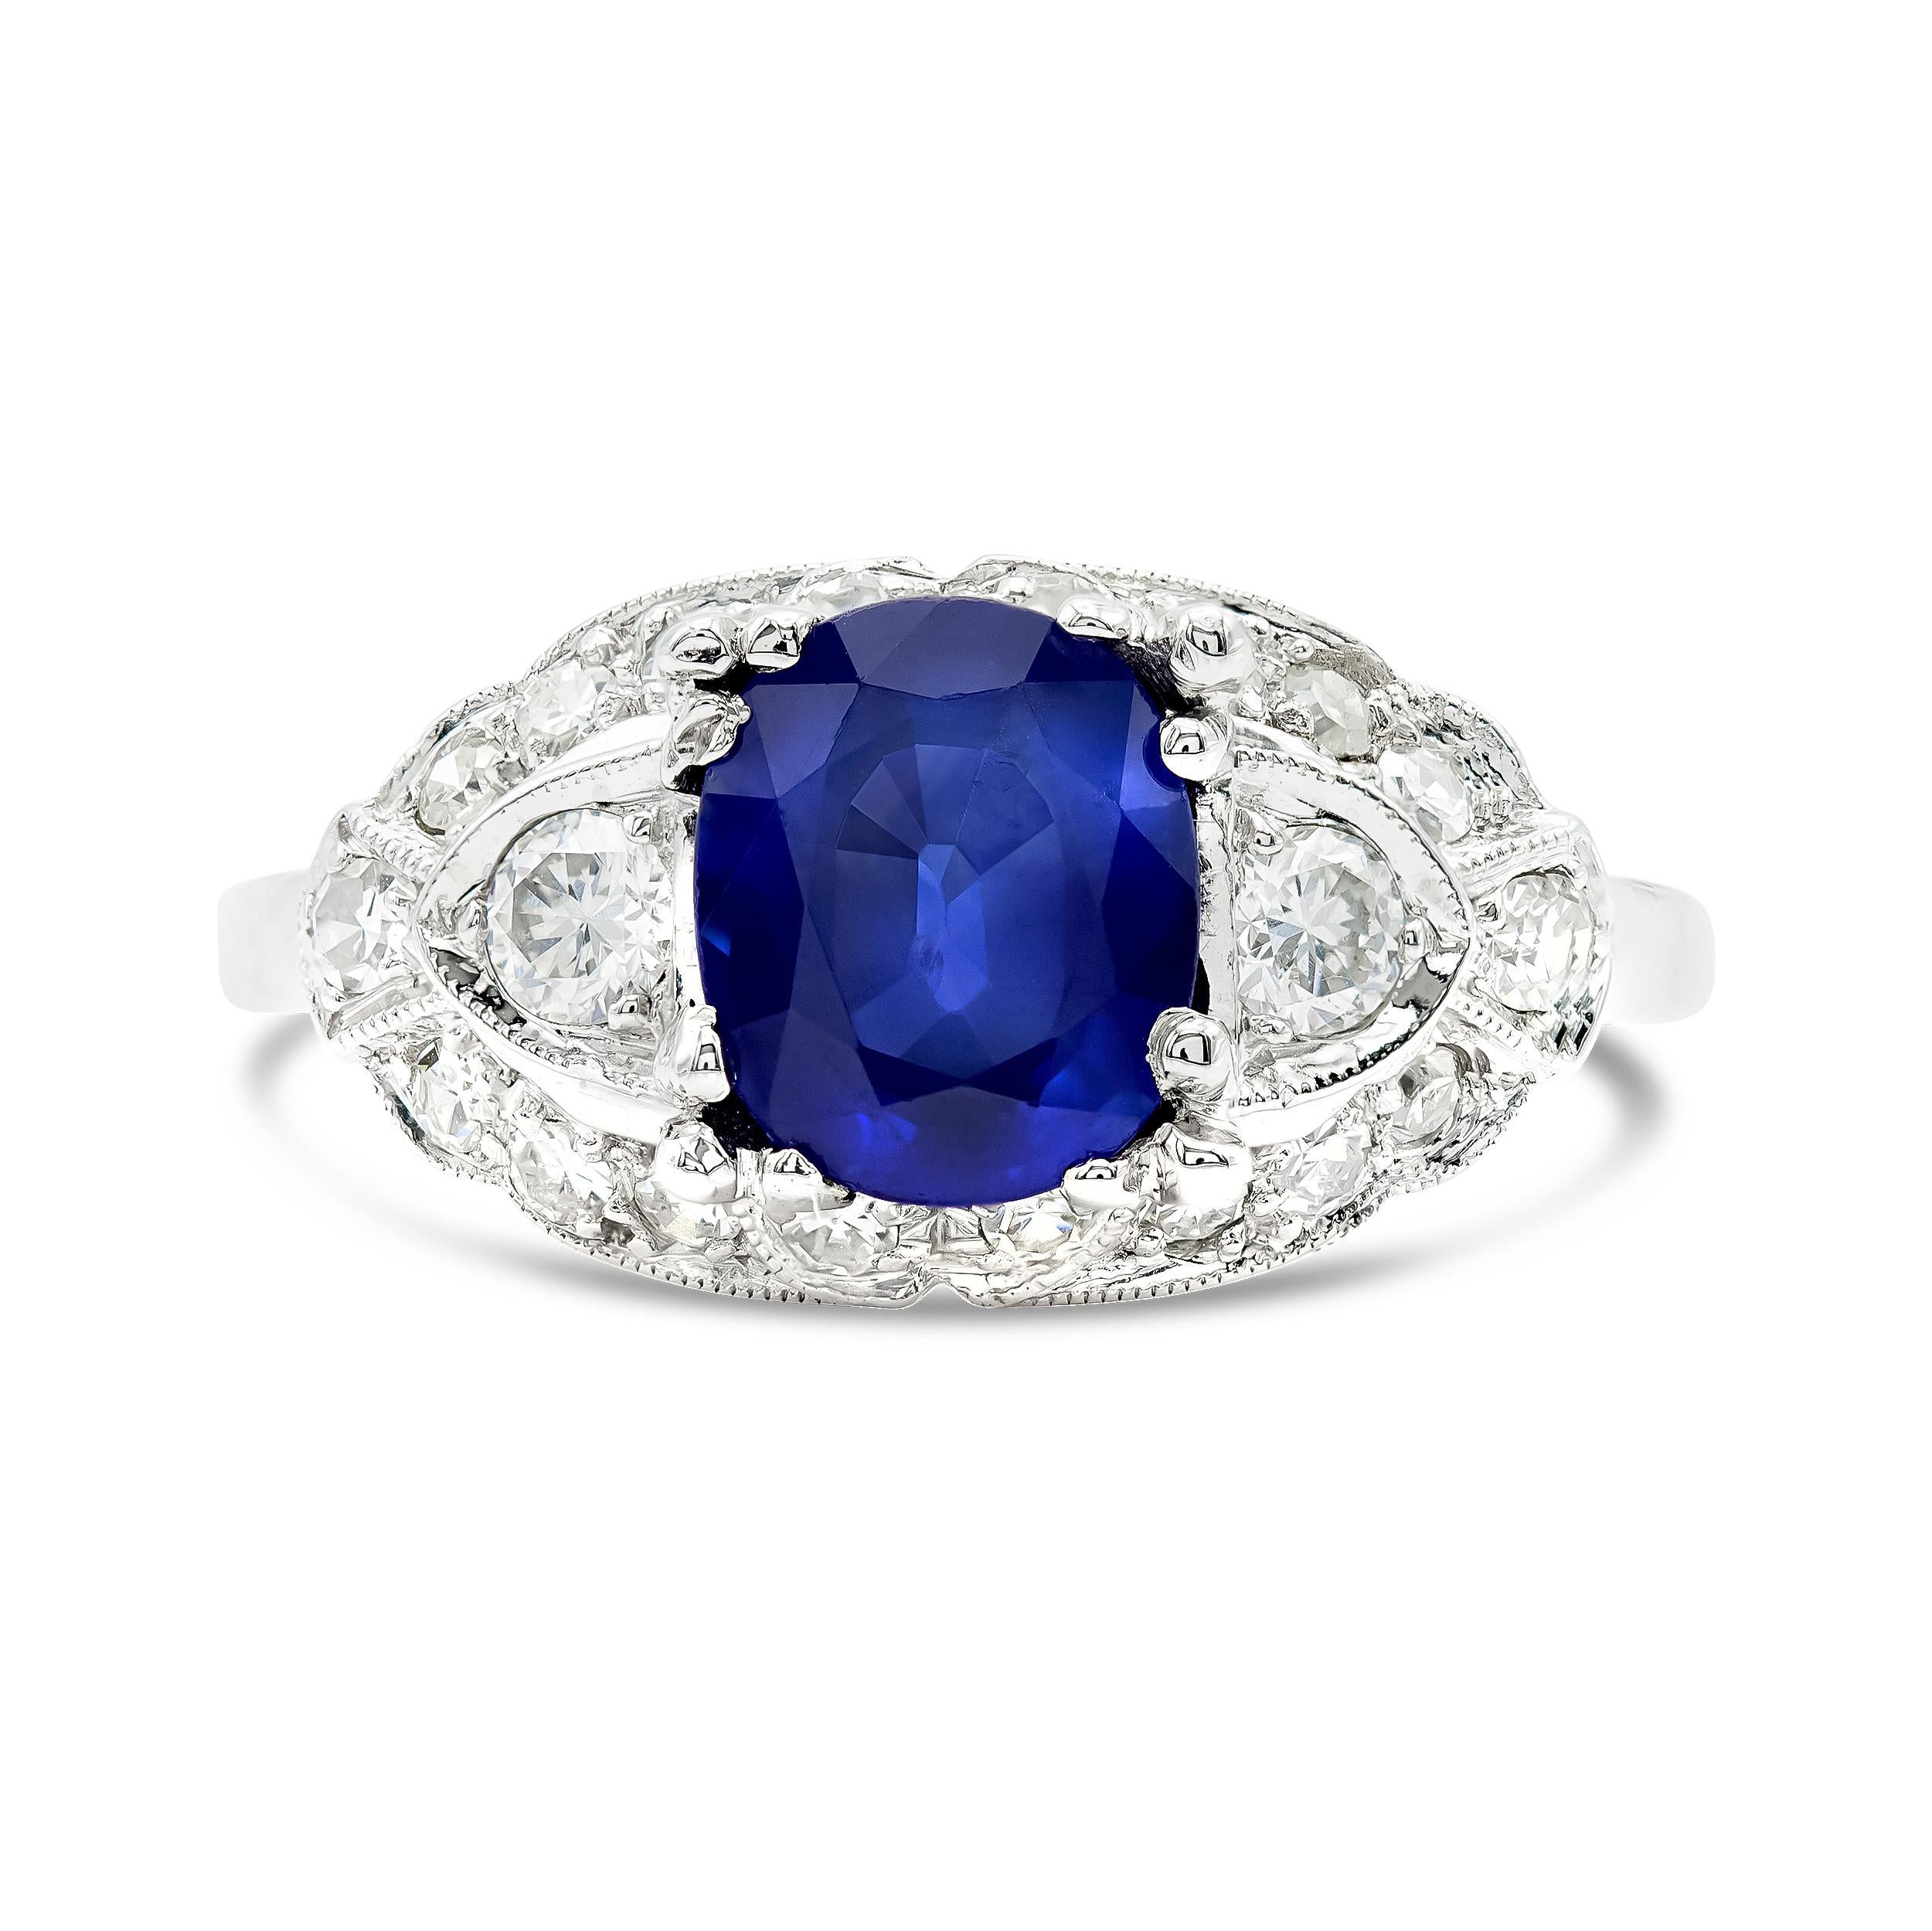 Here's a cool take on an art deco ring, starring a very beautiful 1.55 carat natural sapphire. The center gem's blue color is elevated by 20 accenting diamonds set in super sleek platinum. The frame style setting is a deco-era favorite and we love